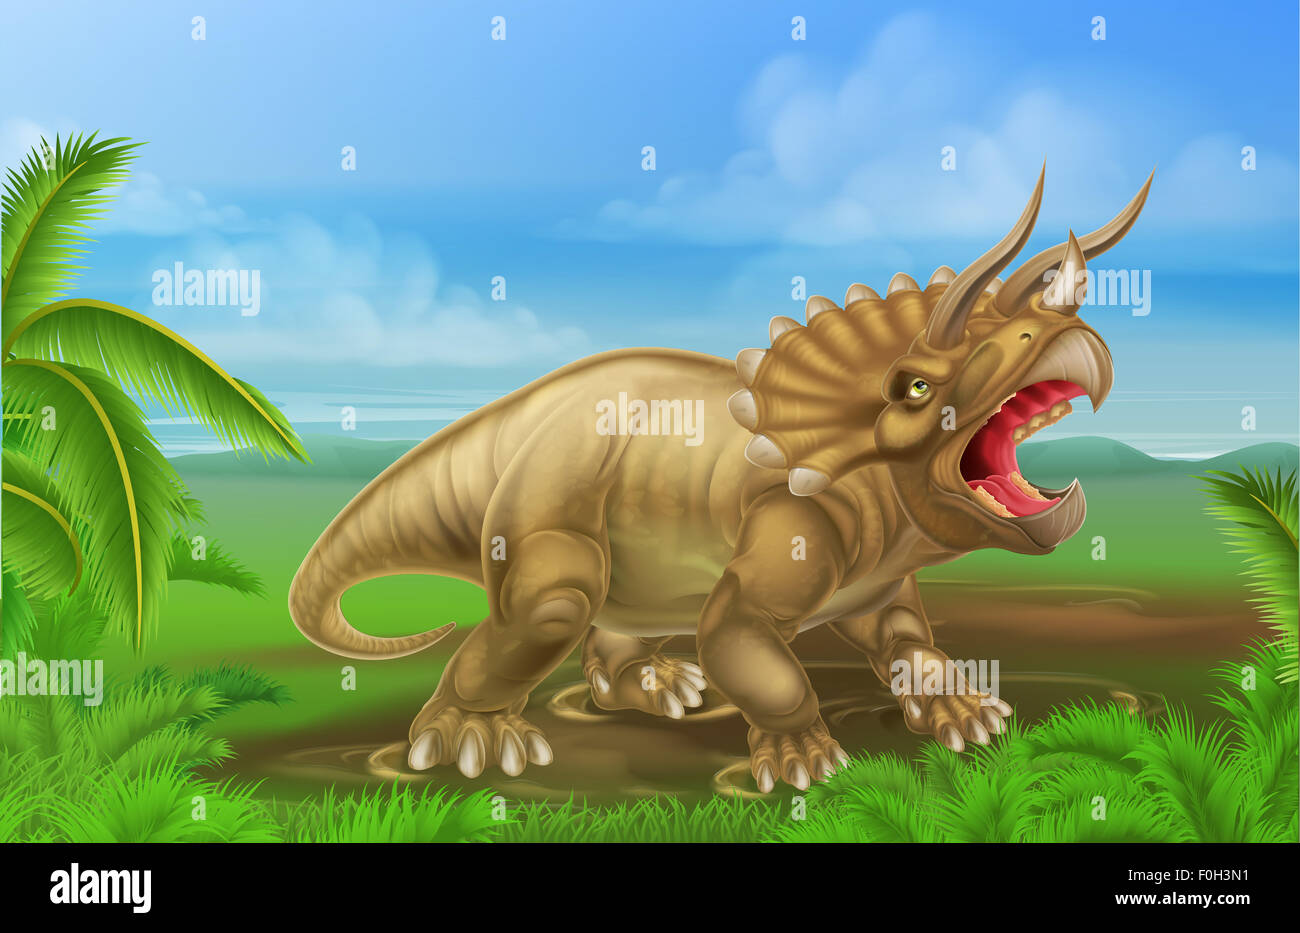 An illustration of atriceratops dinosaur in a prehistoric background Stock Photo